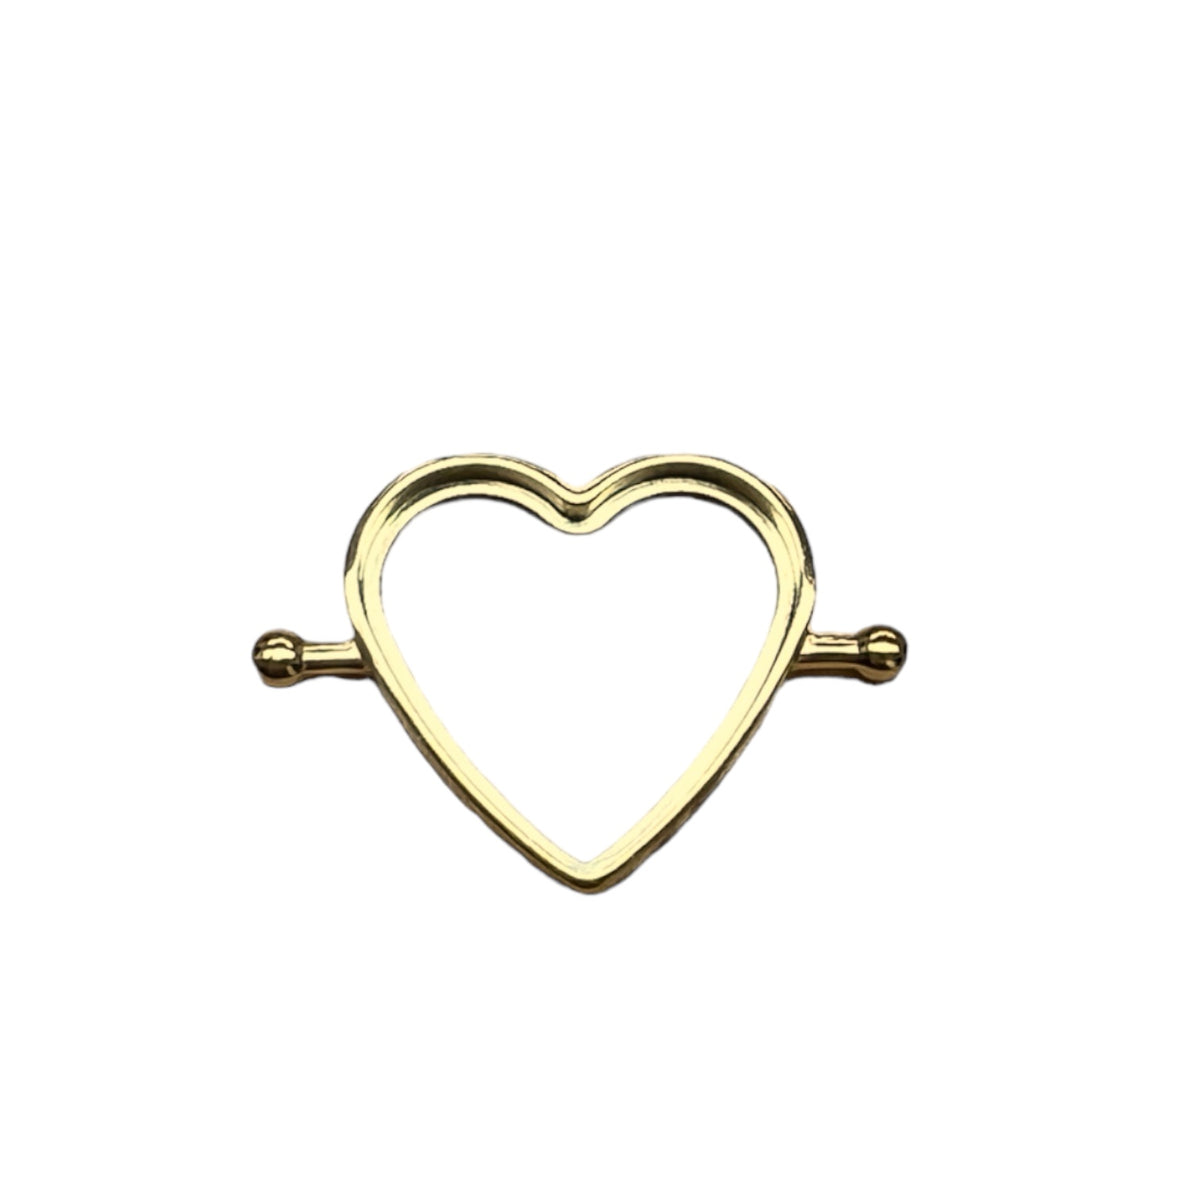 CONQUERing Heart Shaped Blank Element for DIY Silver or Gold Jewelry